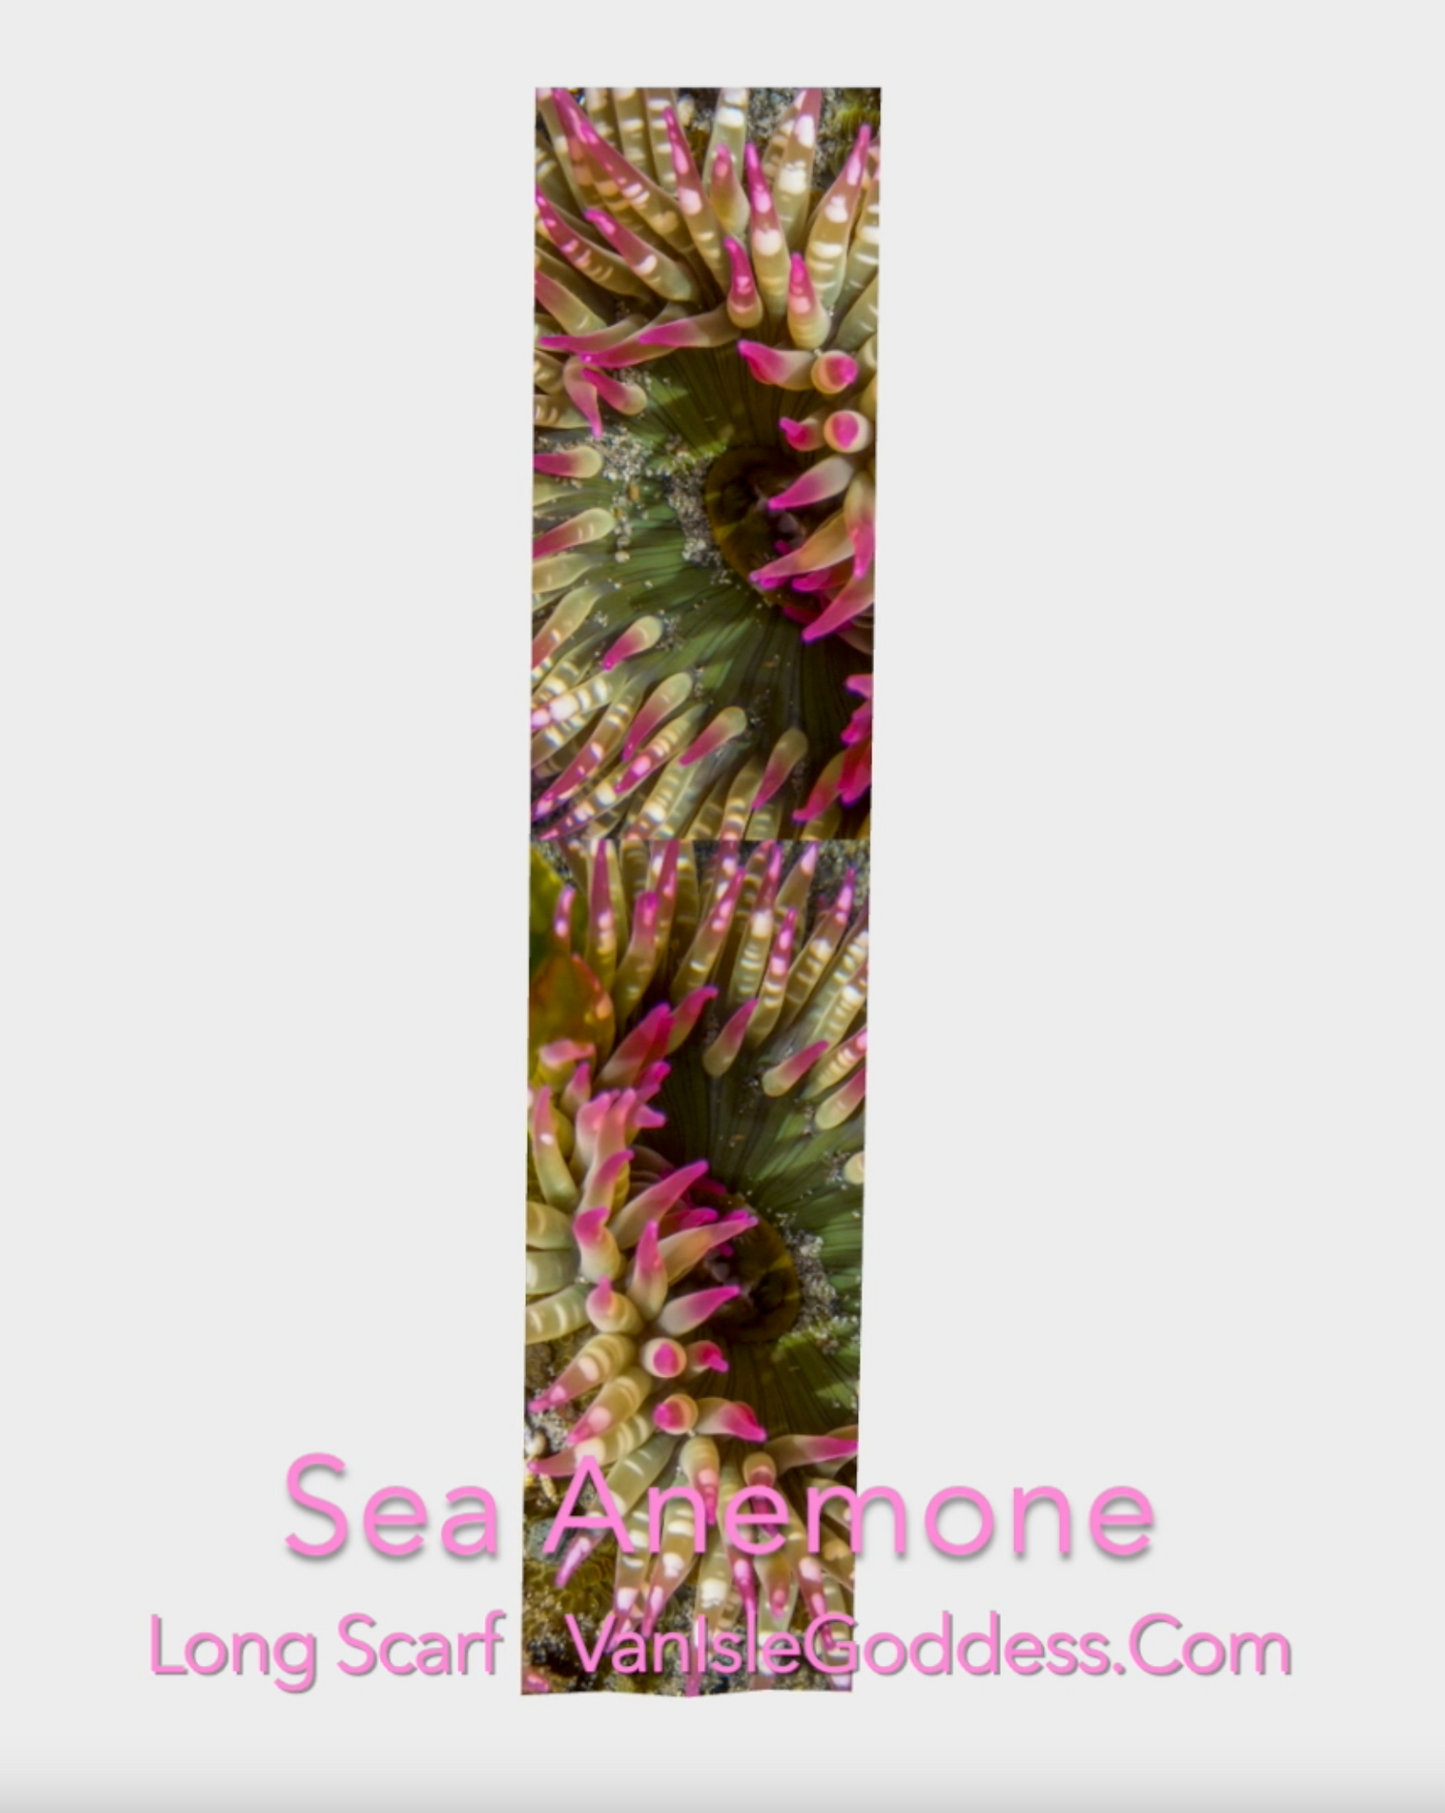 Showing the enchanted sea anemone long scarf in is full length.